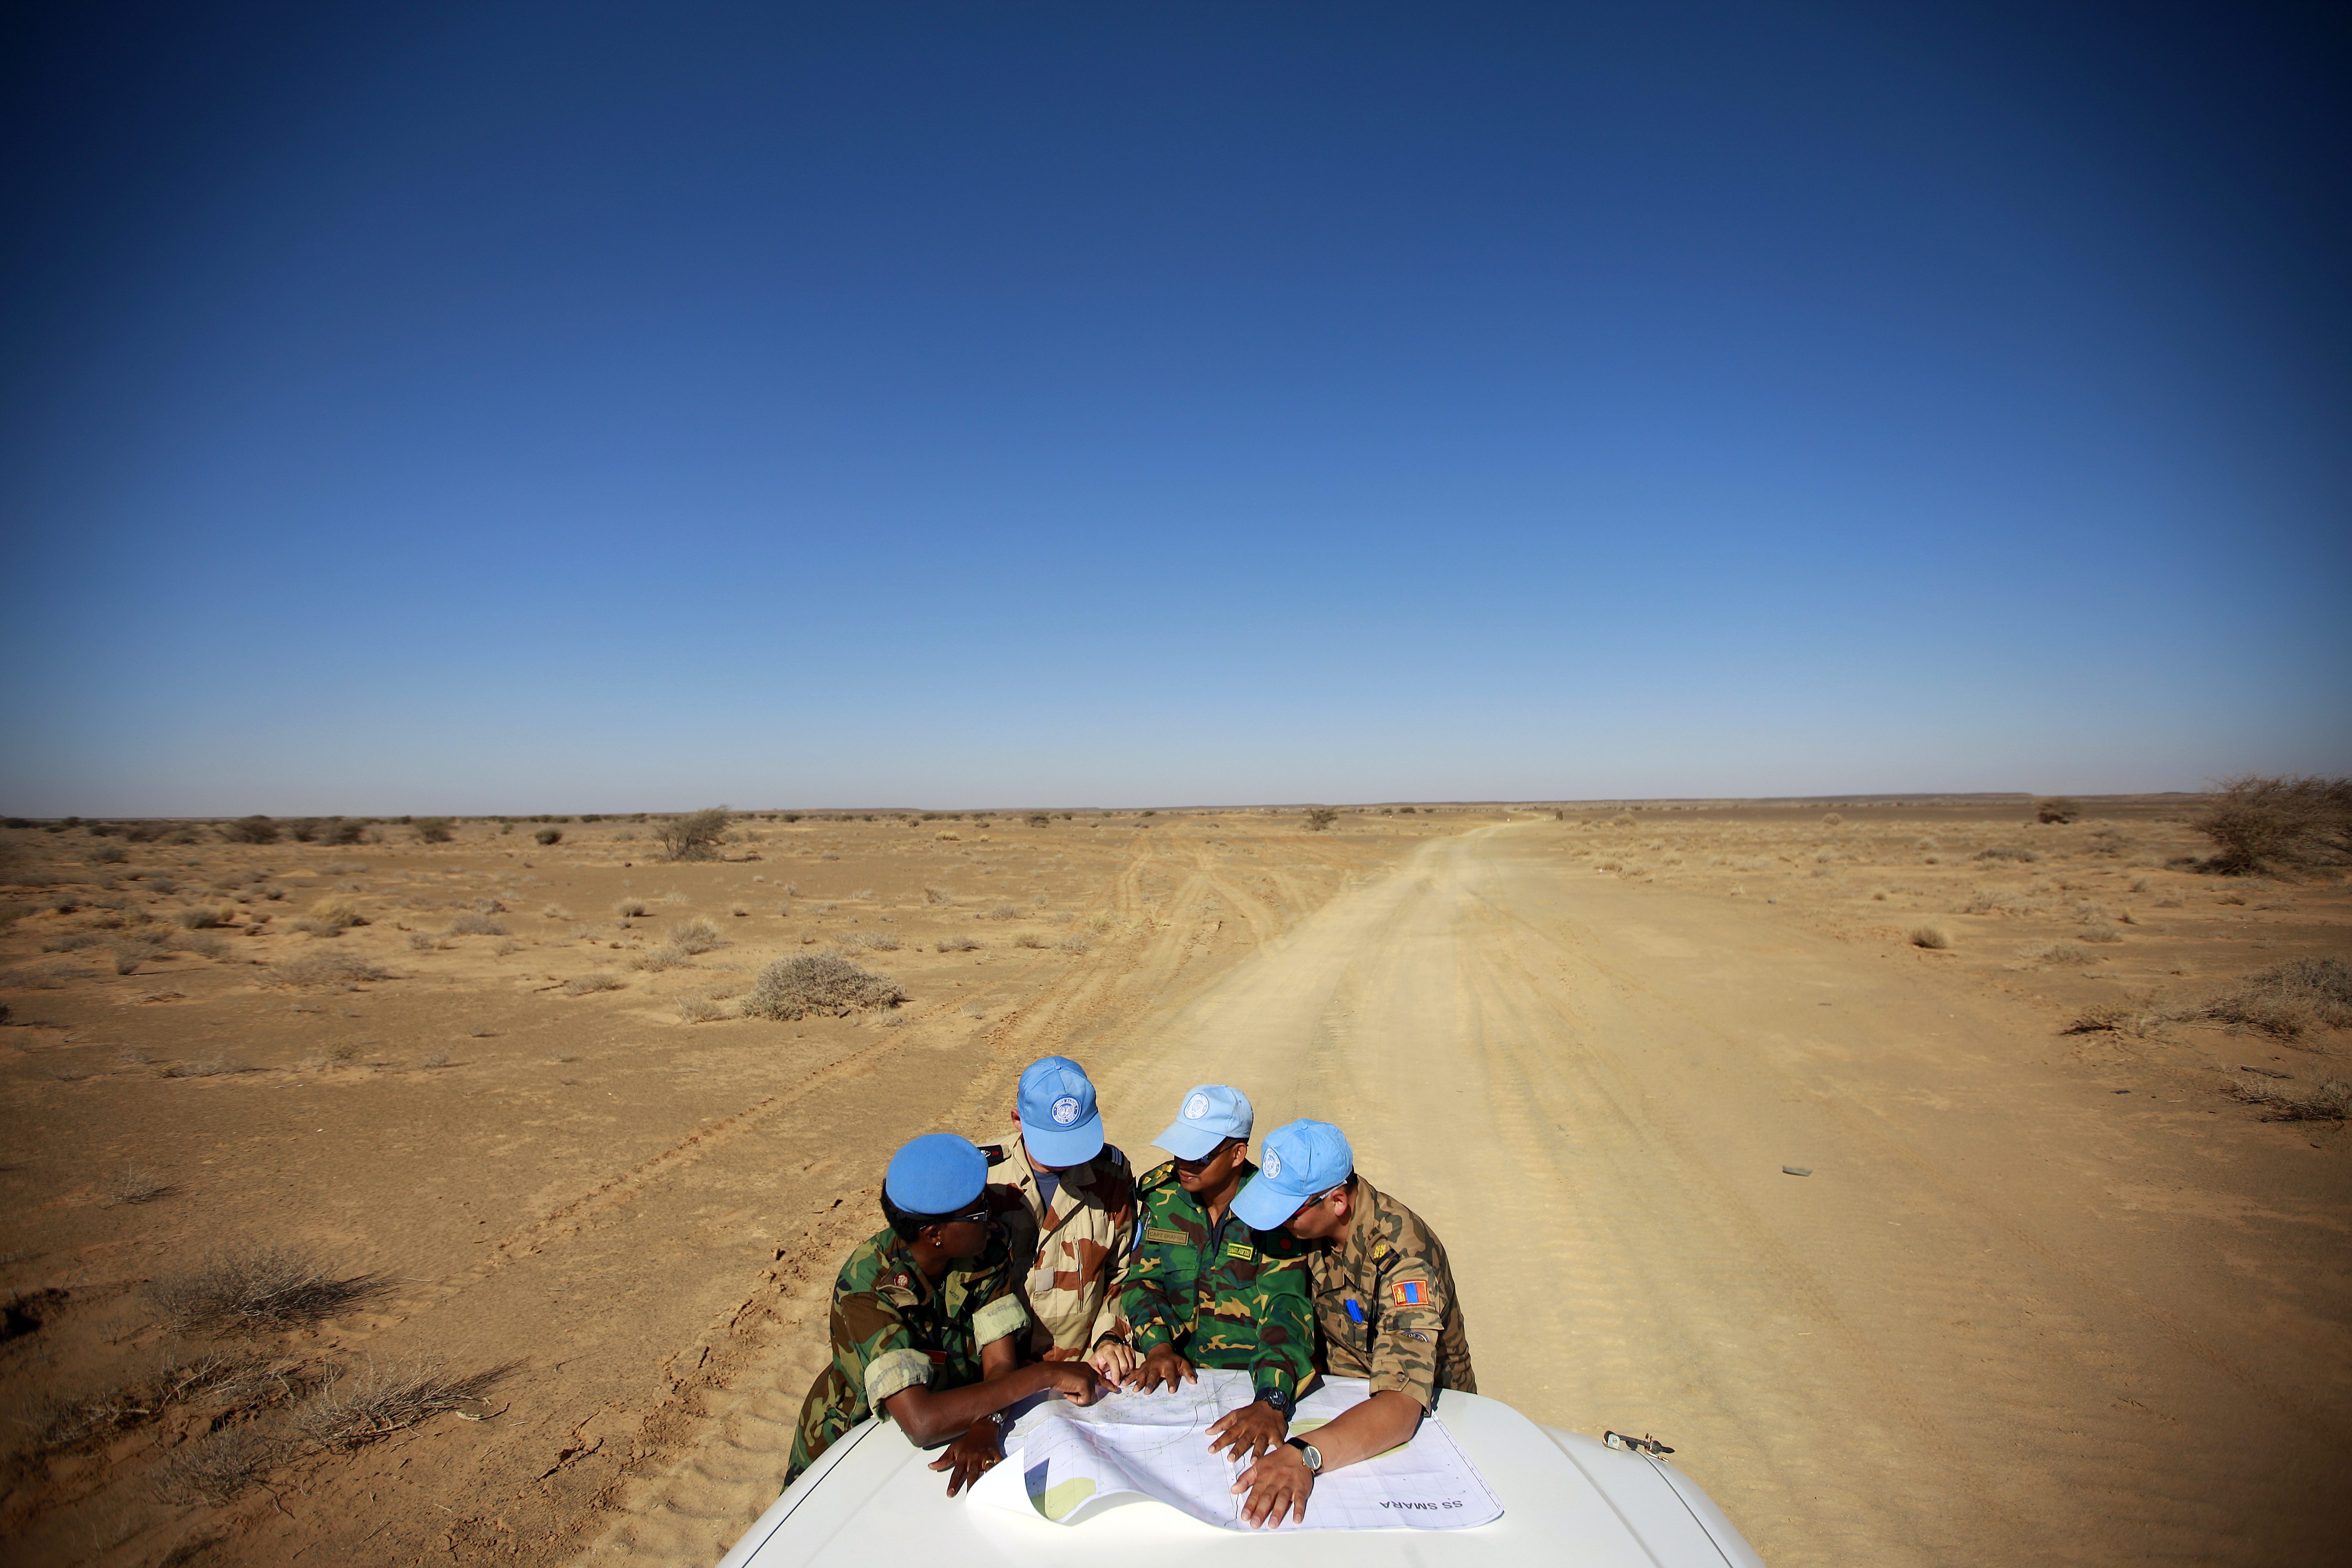 Peacekeepers with the UN Mission for the Referendum in Western Sahara